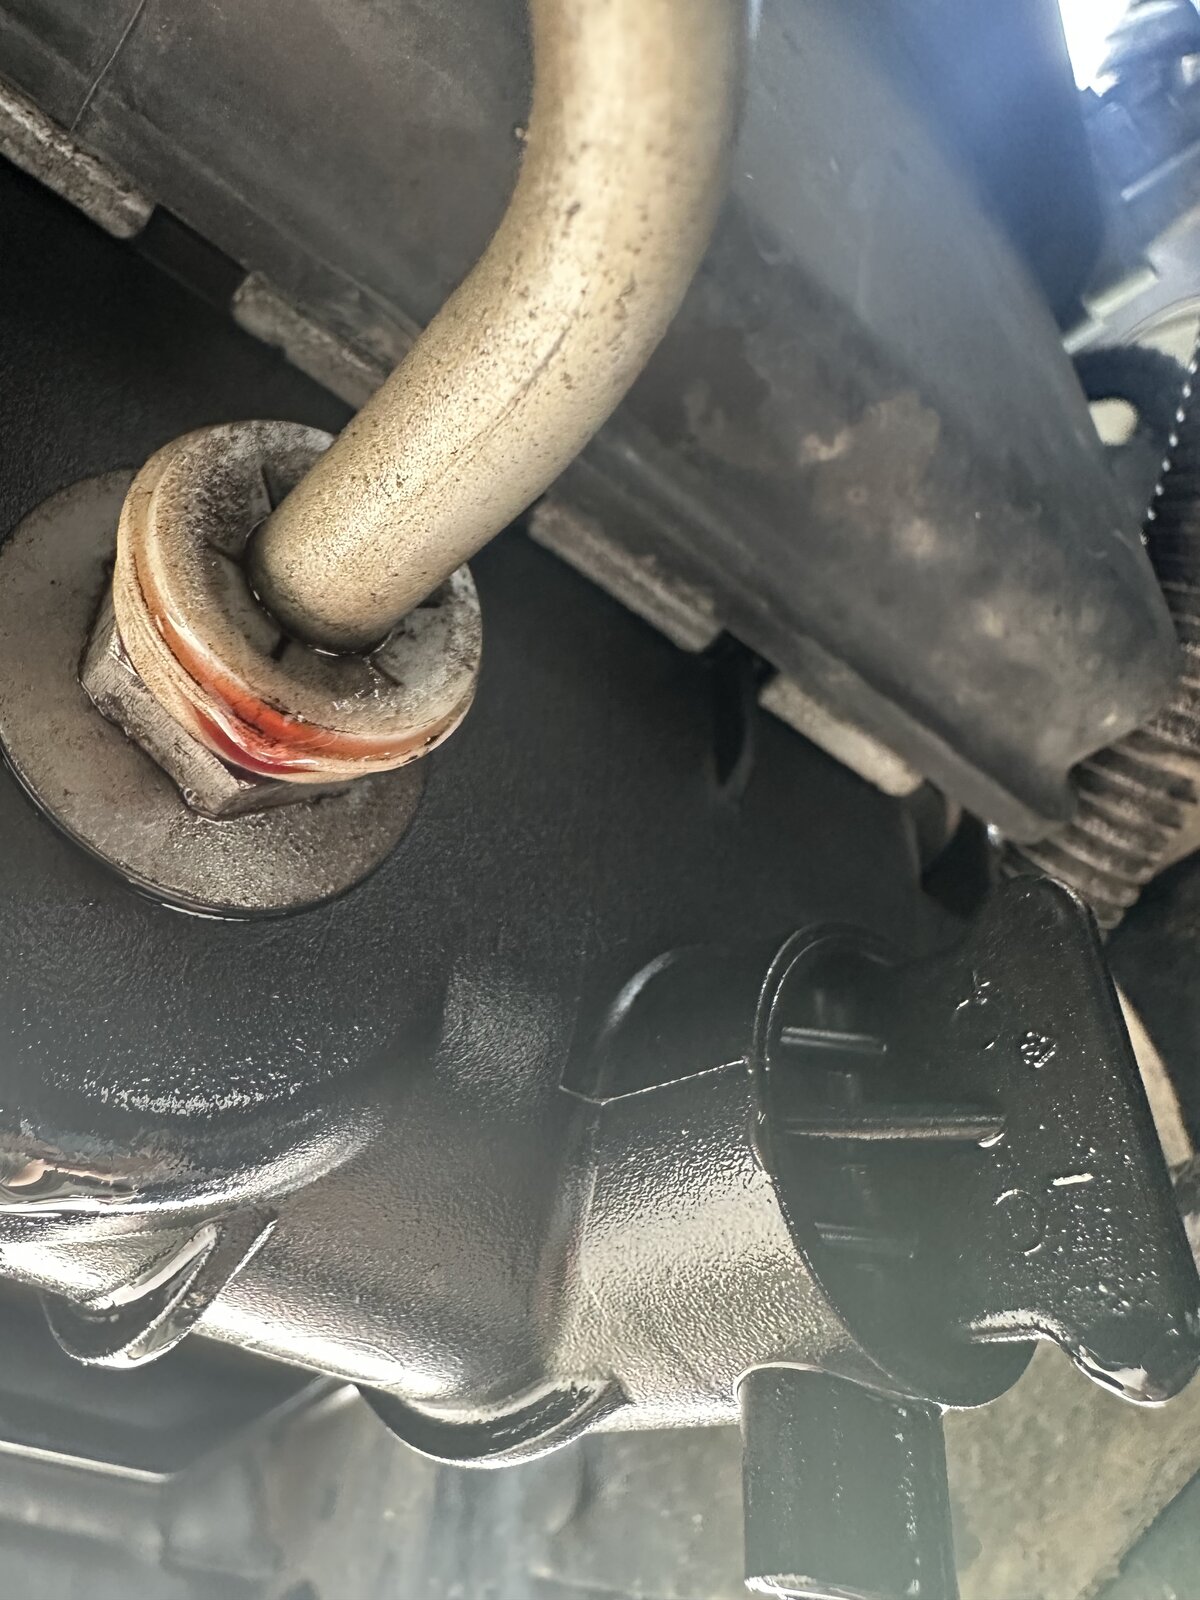 Oil Cooler line and what else leaking?